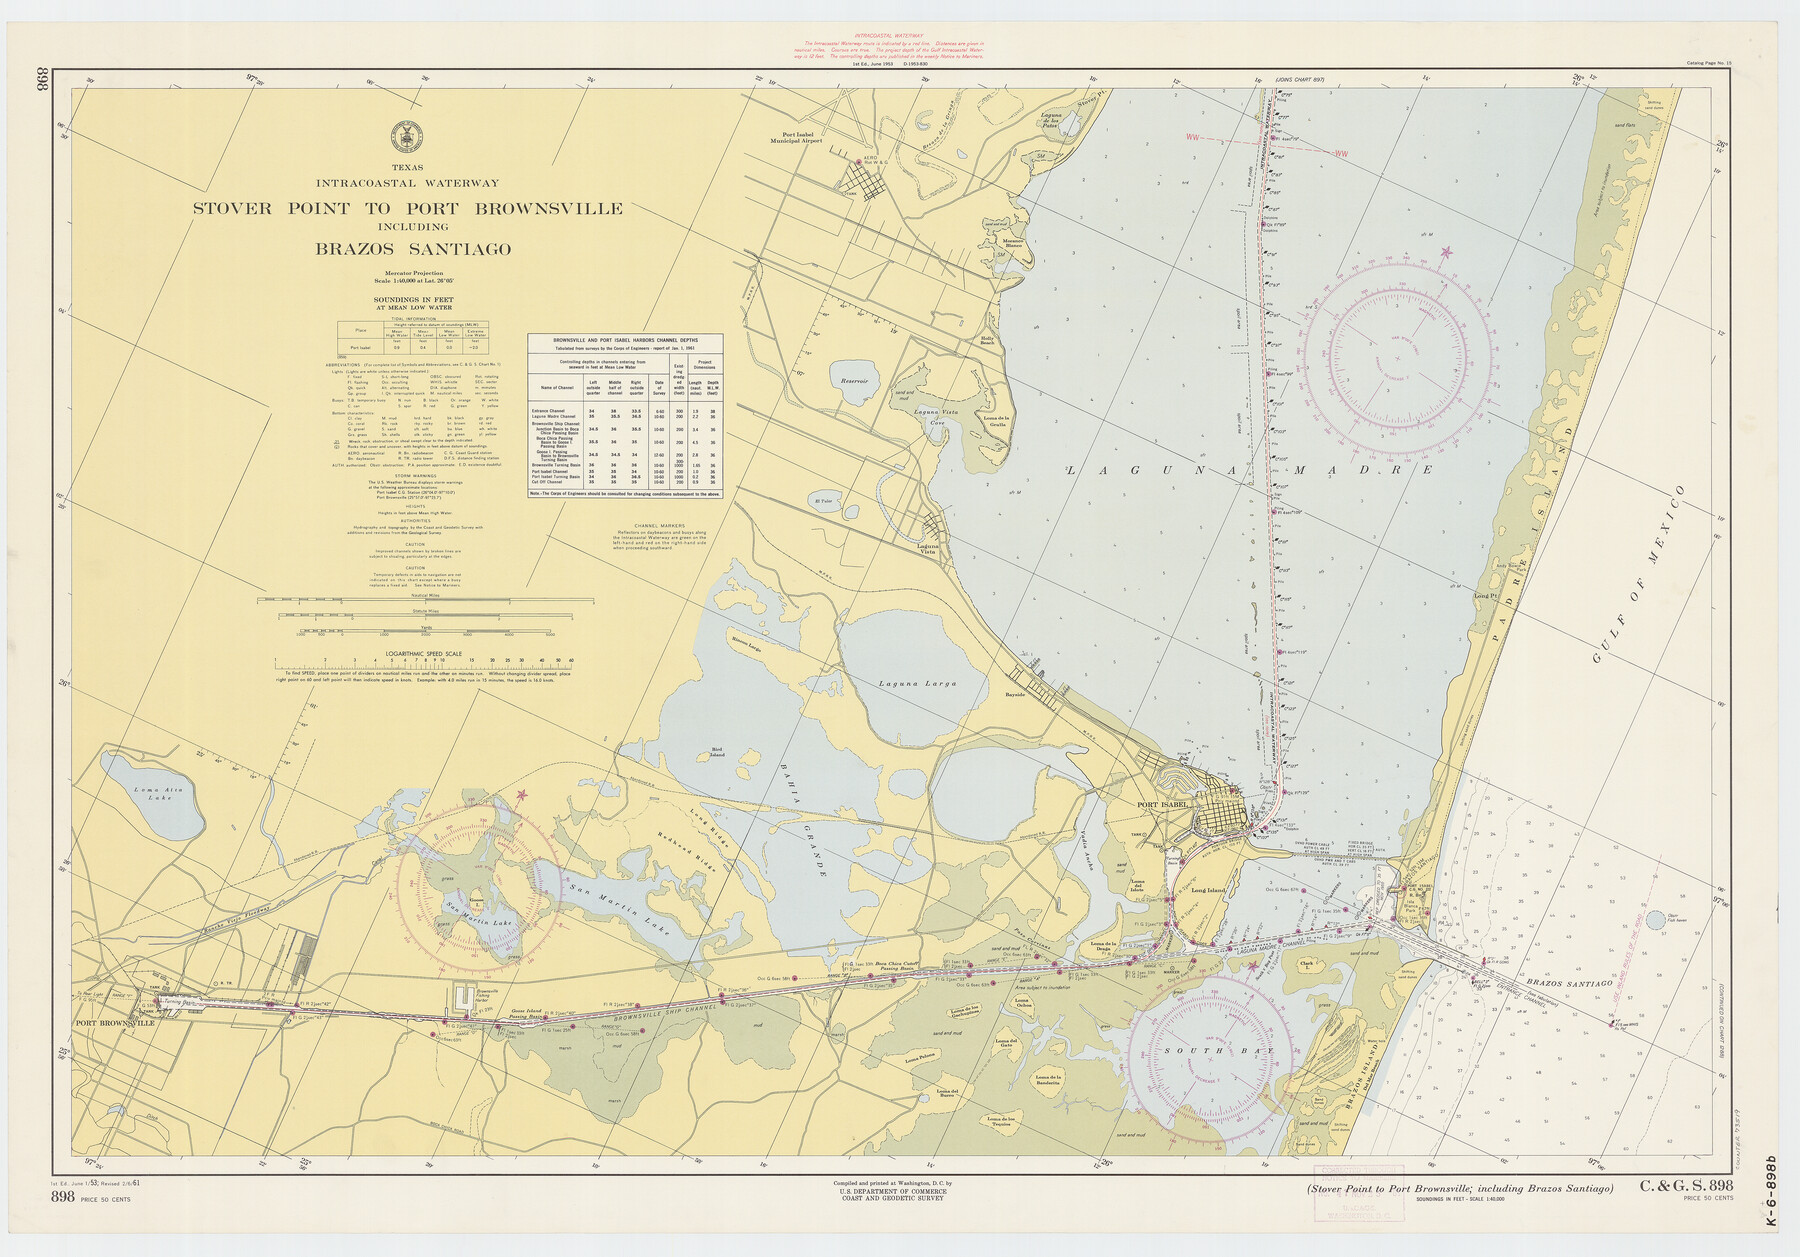 73519, Texas Intracoastal Waterway - Stover Point to Port Brownsville including Brazos Santiago, General Map Collection